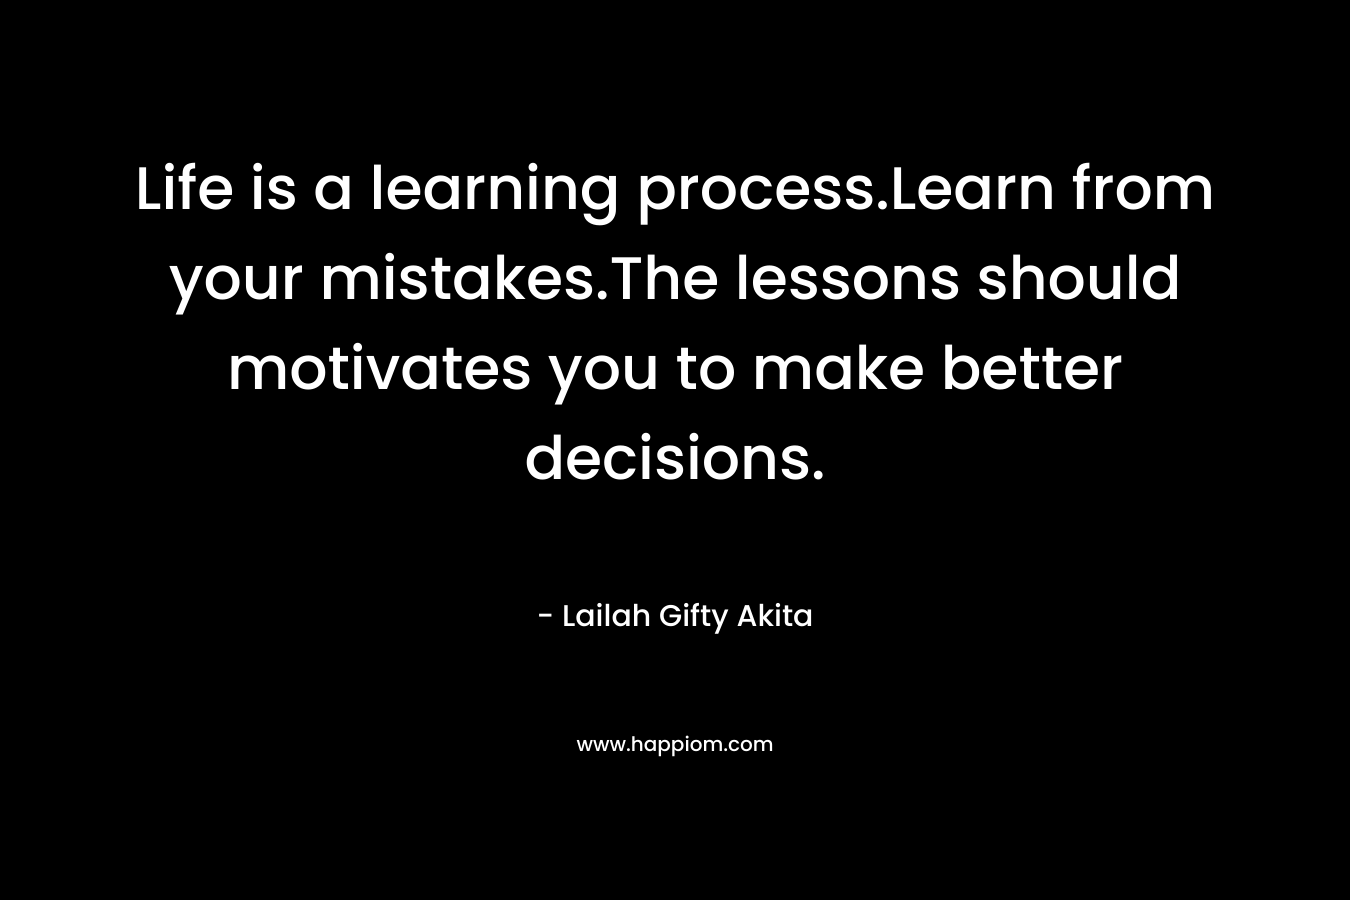 Life is a learning process.Learn from your mistakes.The lessons should motivates you to make better decisions. – Lailah Gifty Akita